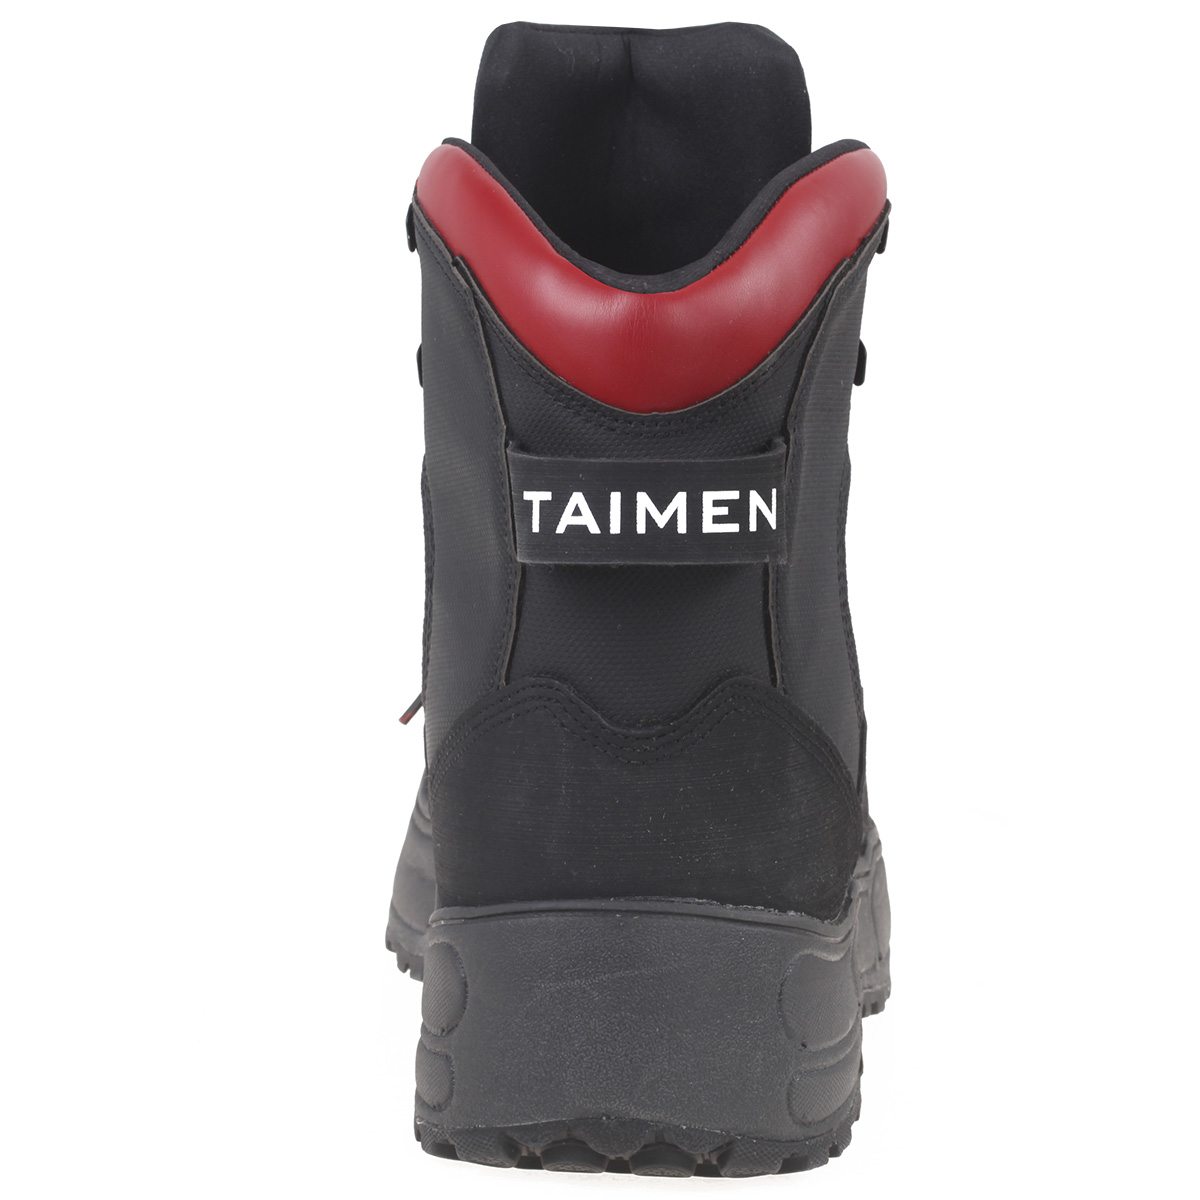 Taimen Onon Wading Boots (tugs. studs incl.)